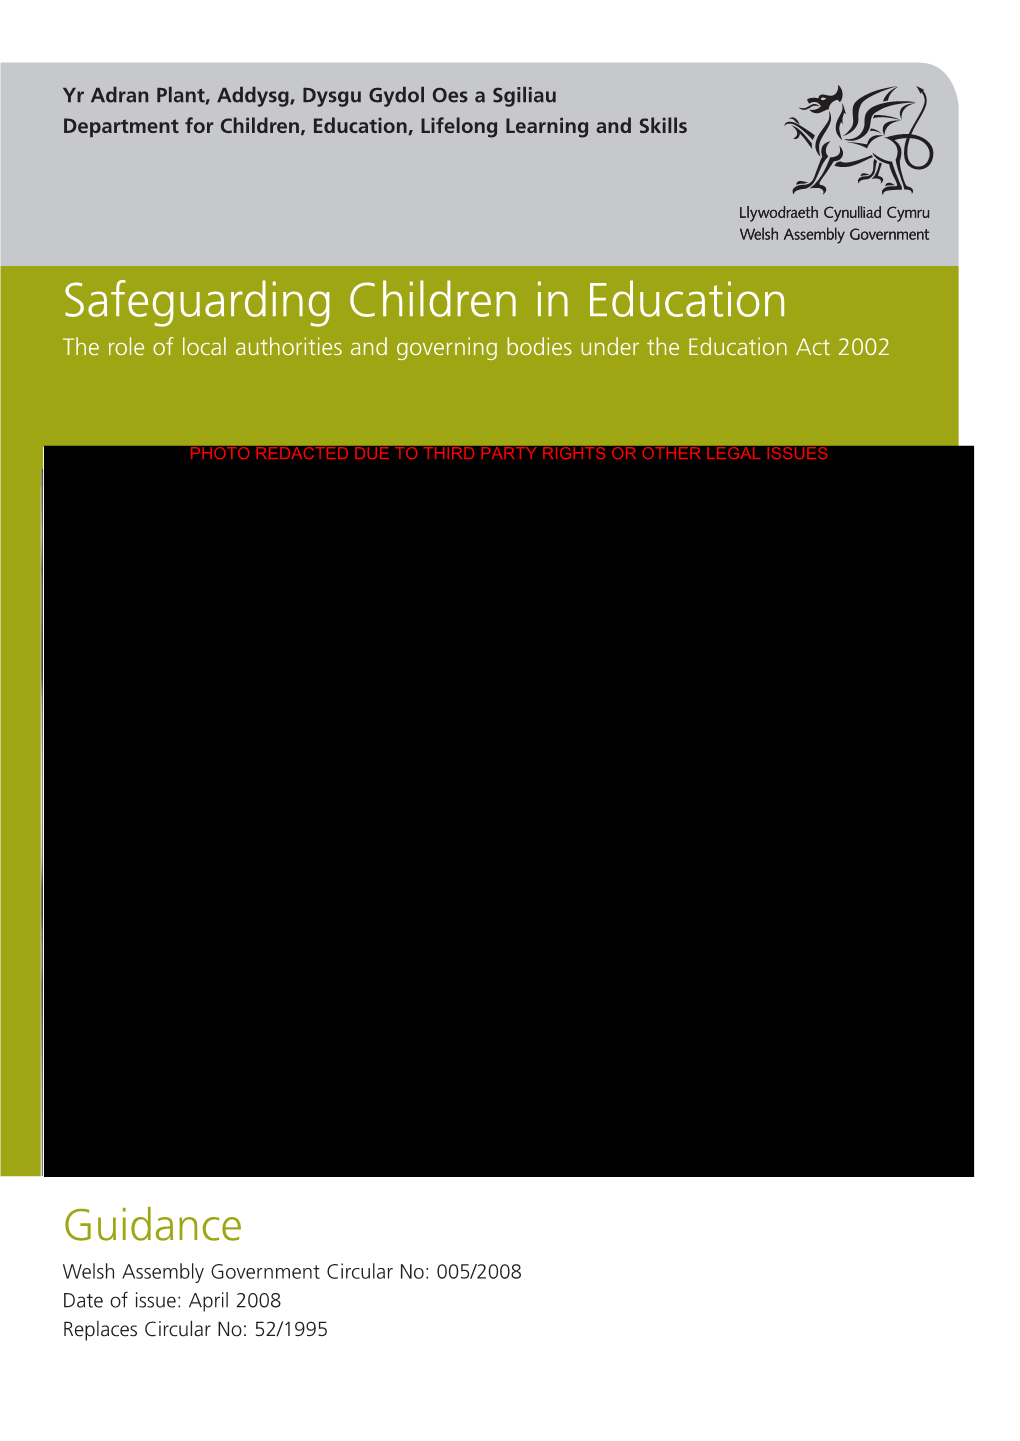 Safeguarding Children in Education the Role of Local Authorities and Governing Bodies Under the Education Act 2002